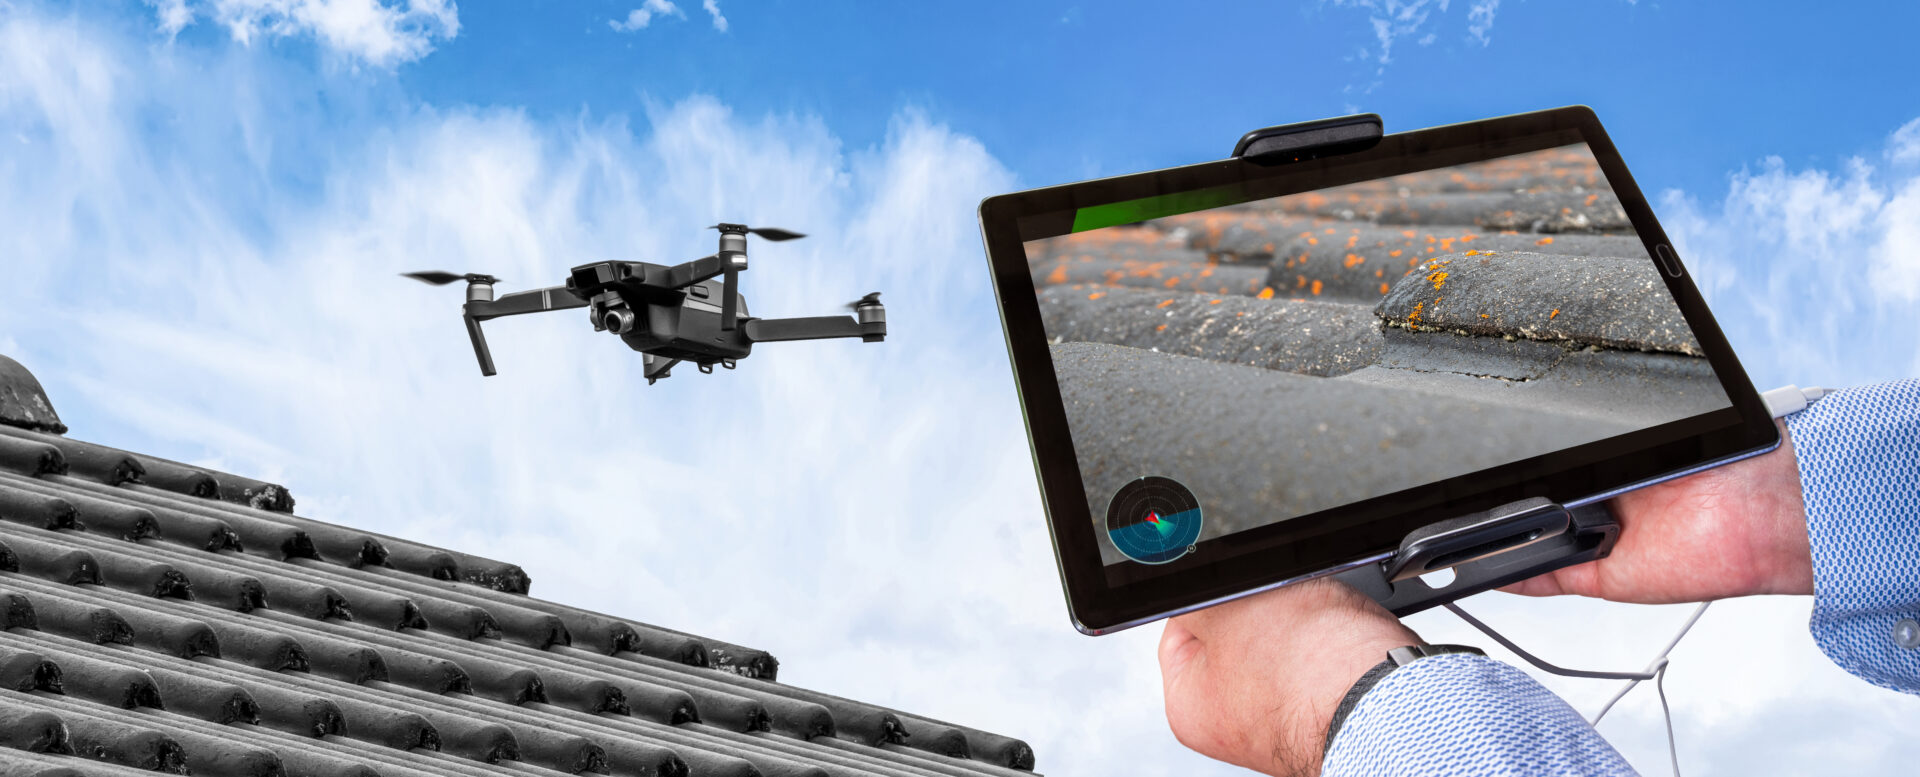 A person holding up a tablet with an image of a drone flying over.